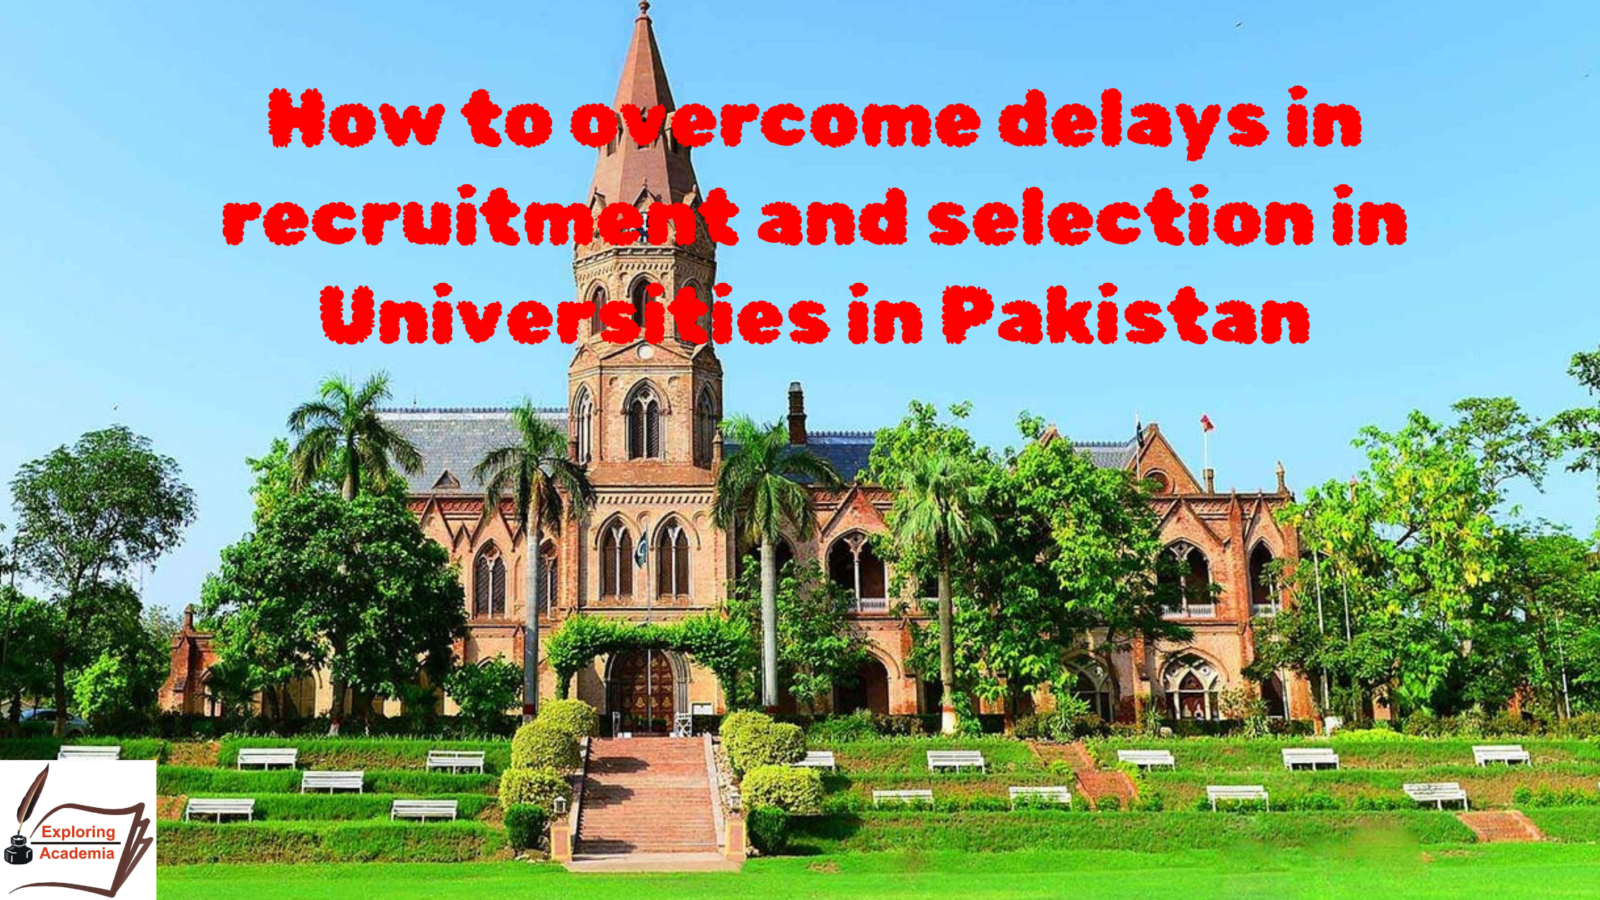 How to overcome inordinate delays in recruitment and selection in Universities in Pakistan?